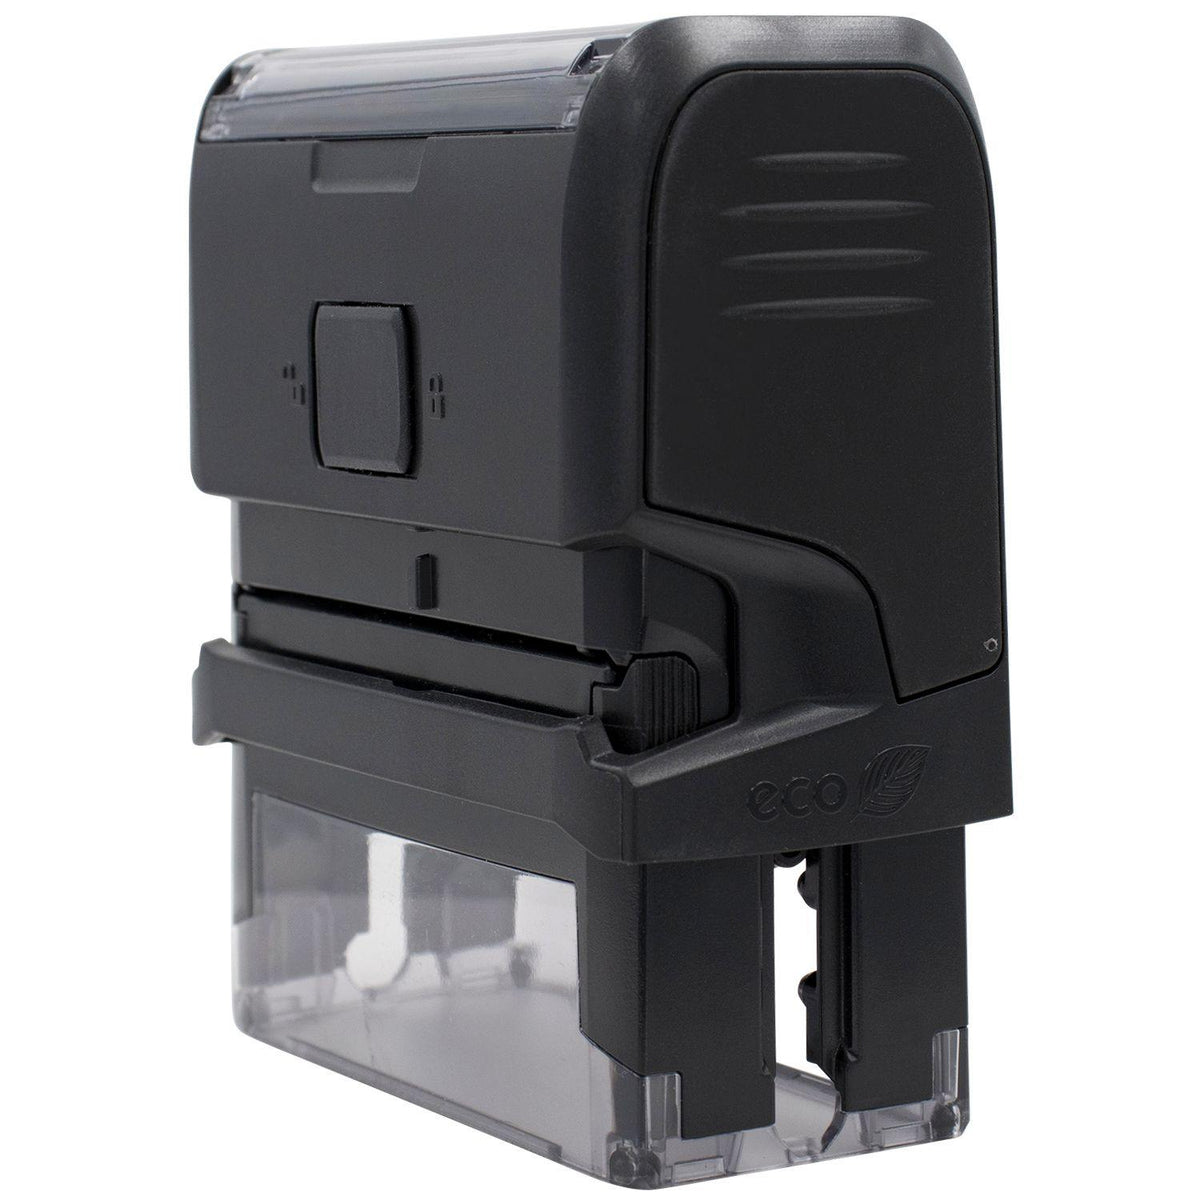 Side View of Large Self-Inking Anulado Stamp at an Angle